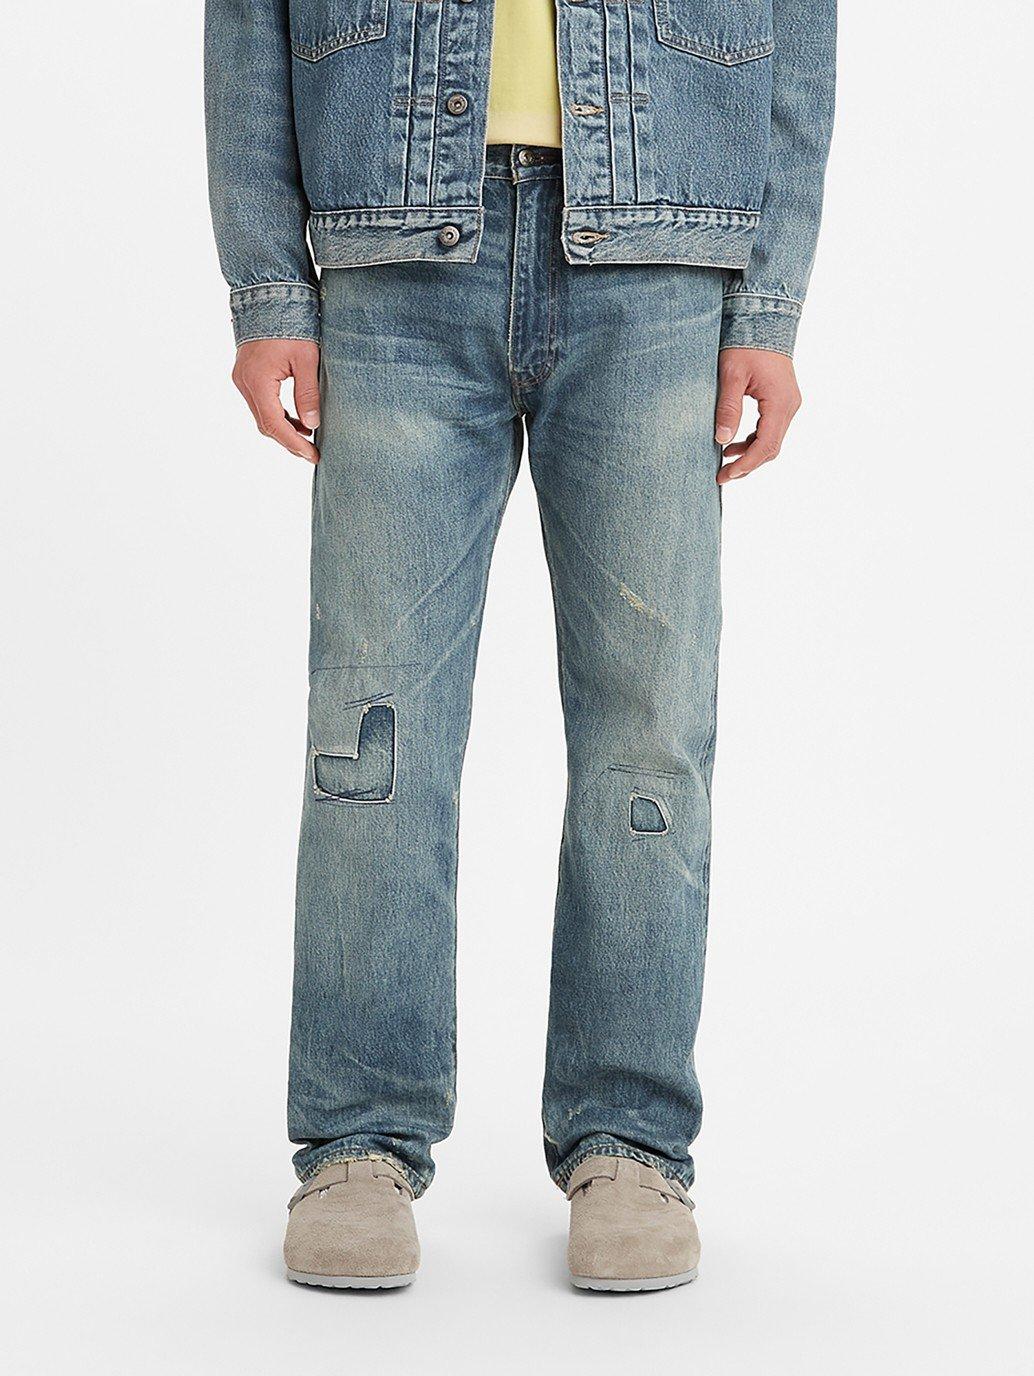 Buy Levi's® Made & Crafted® Men's 551™ Z Authentic Straight Jeans | Levi's®  HK Official Online Shop